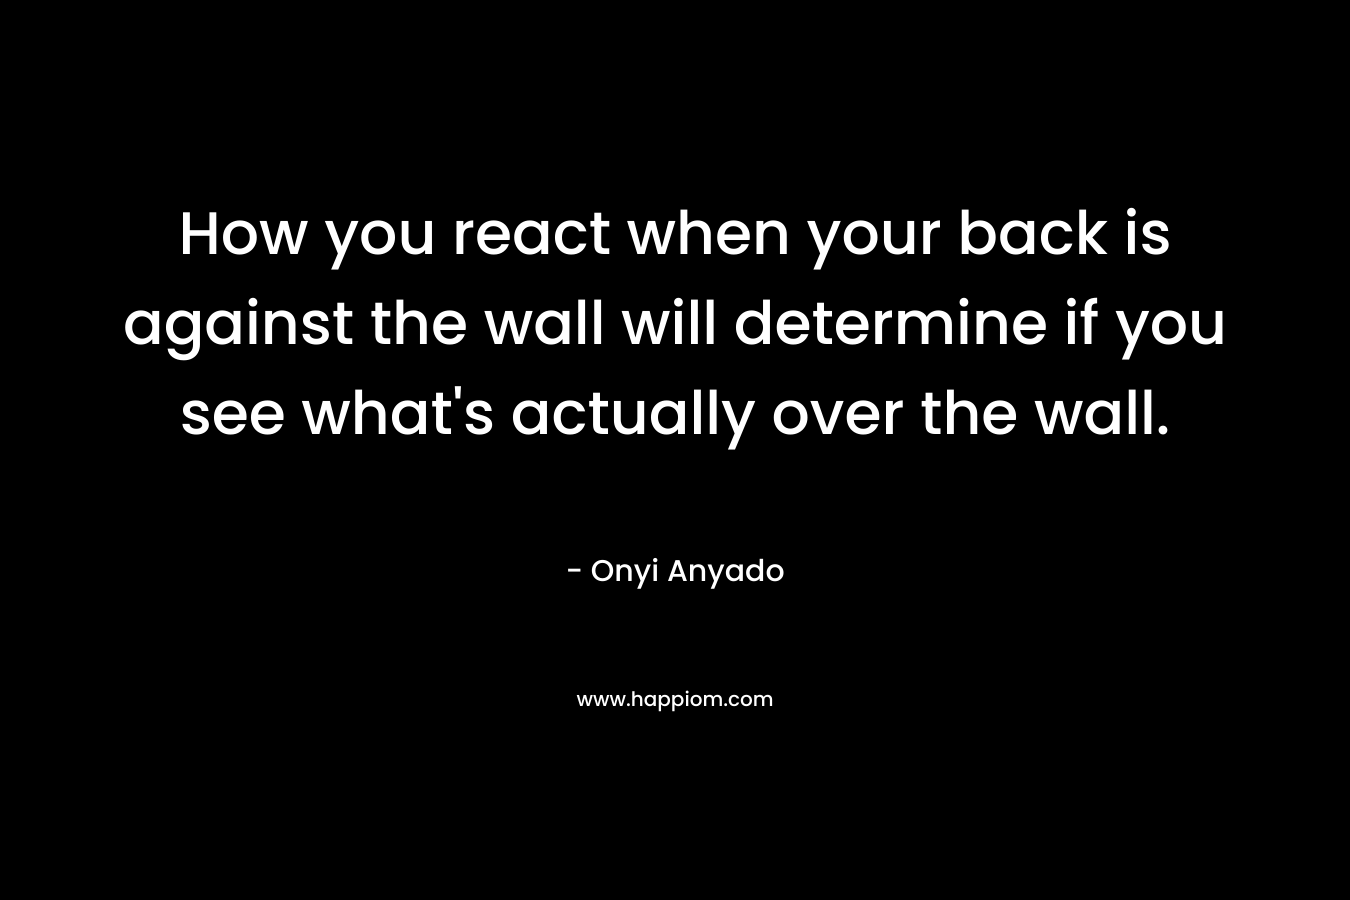 How you react when your back is against the wall will determine if you see what’s actually over the wall. – Onyi Anyado